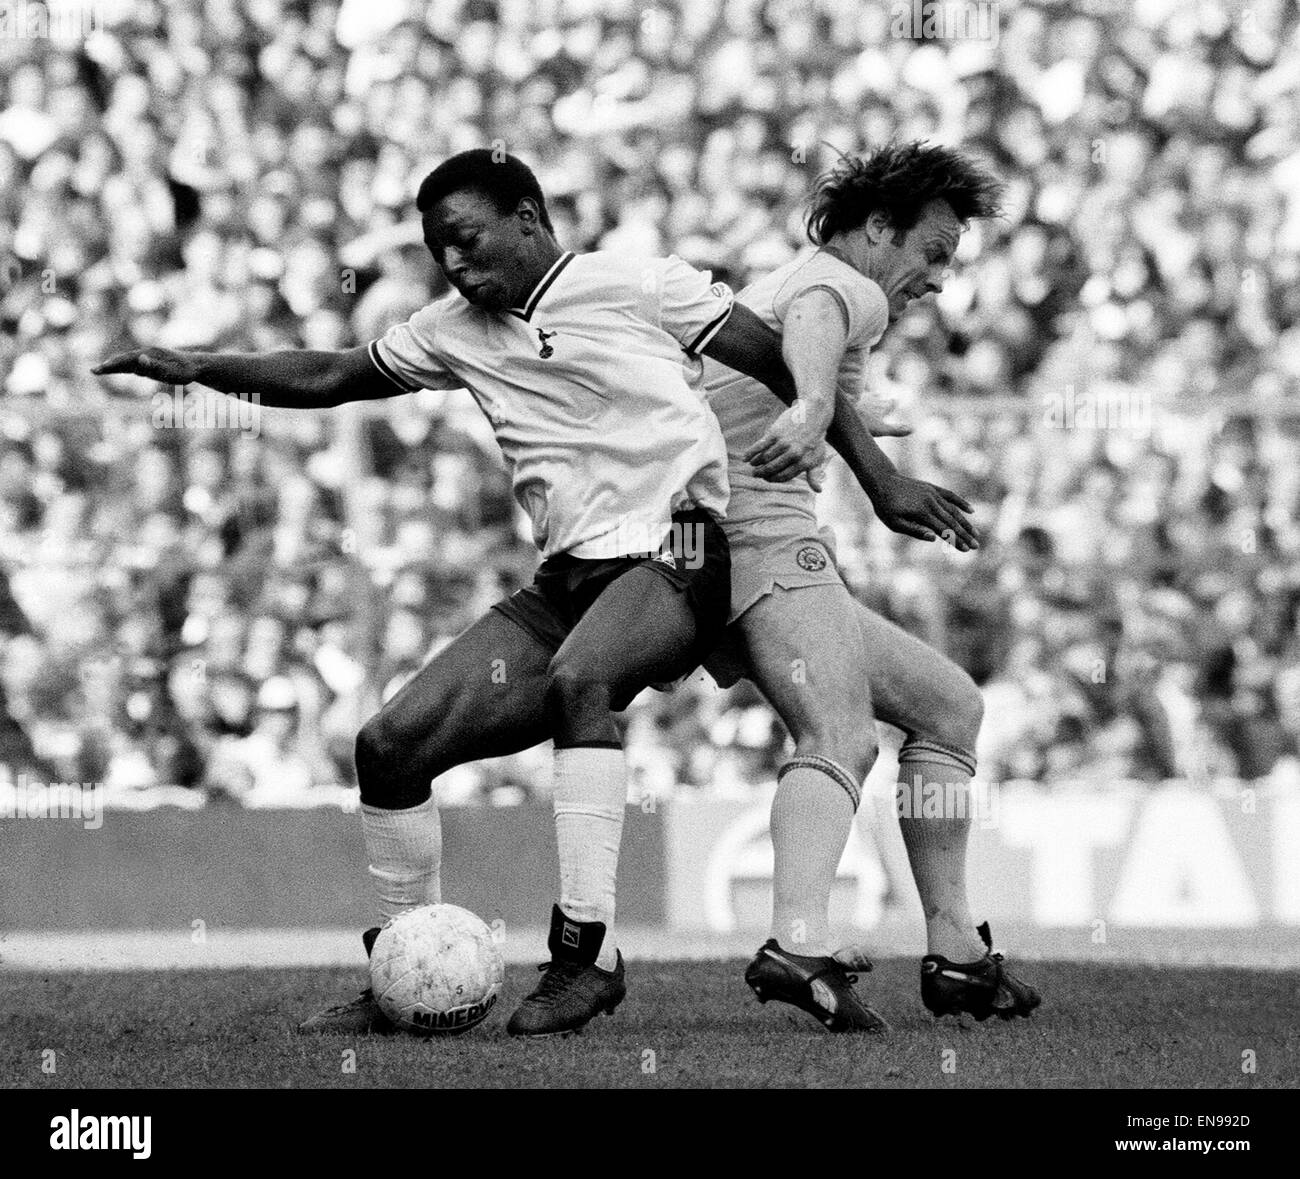 English League Division One match at White Hart Lane. Tottenham Hotspur 2 v Leeds United 1. Garth Crooks of Spurs on the ball tangling with Arthur Graham. 8th May 1982. Stock Photo